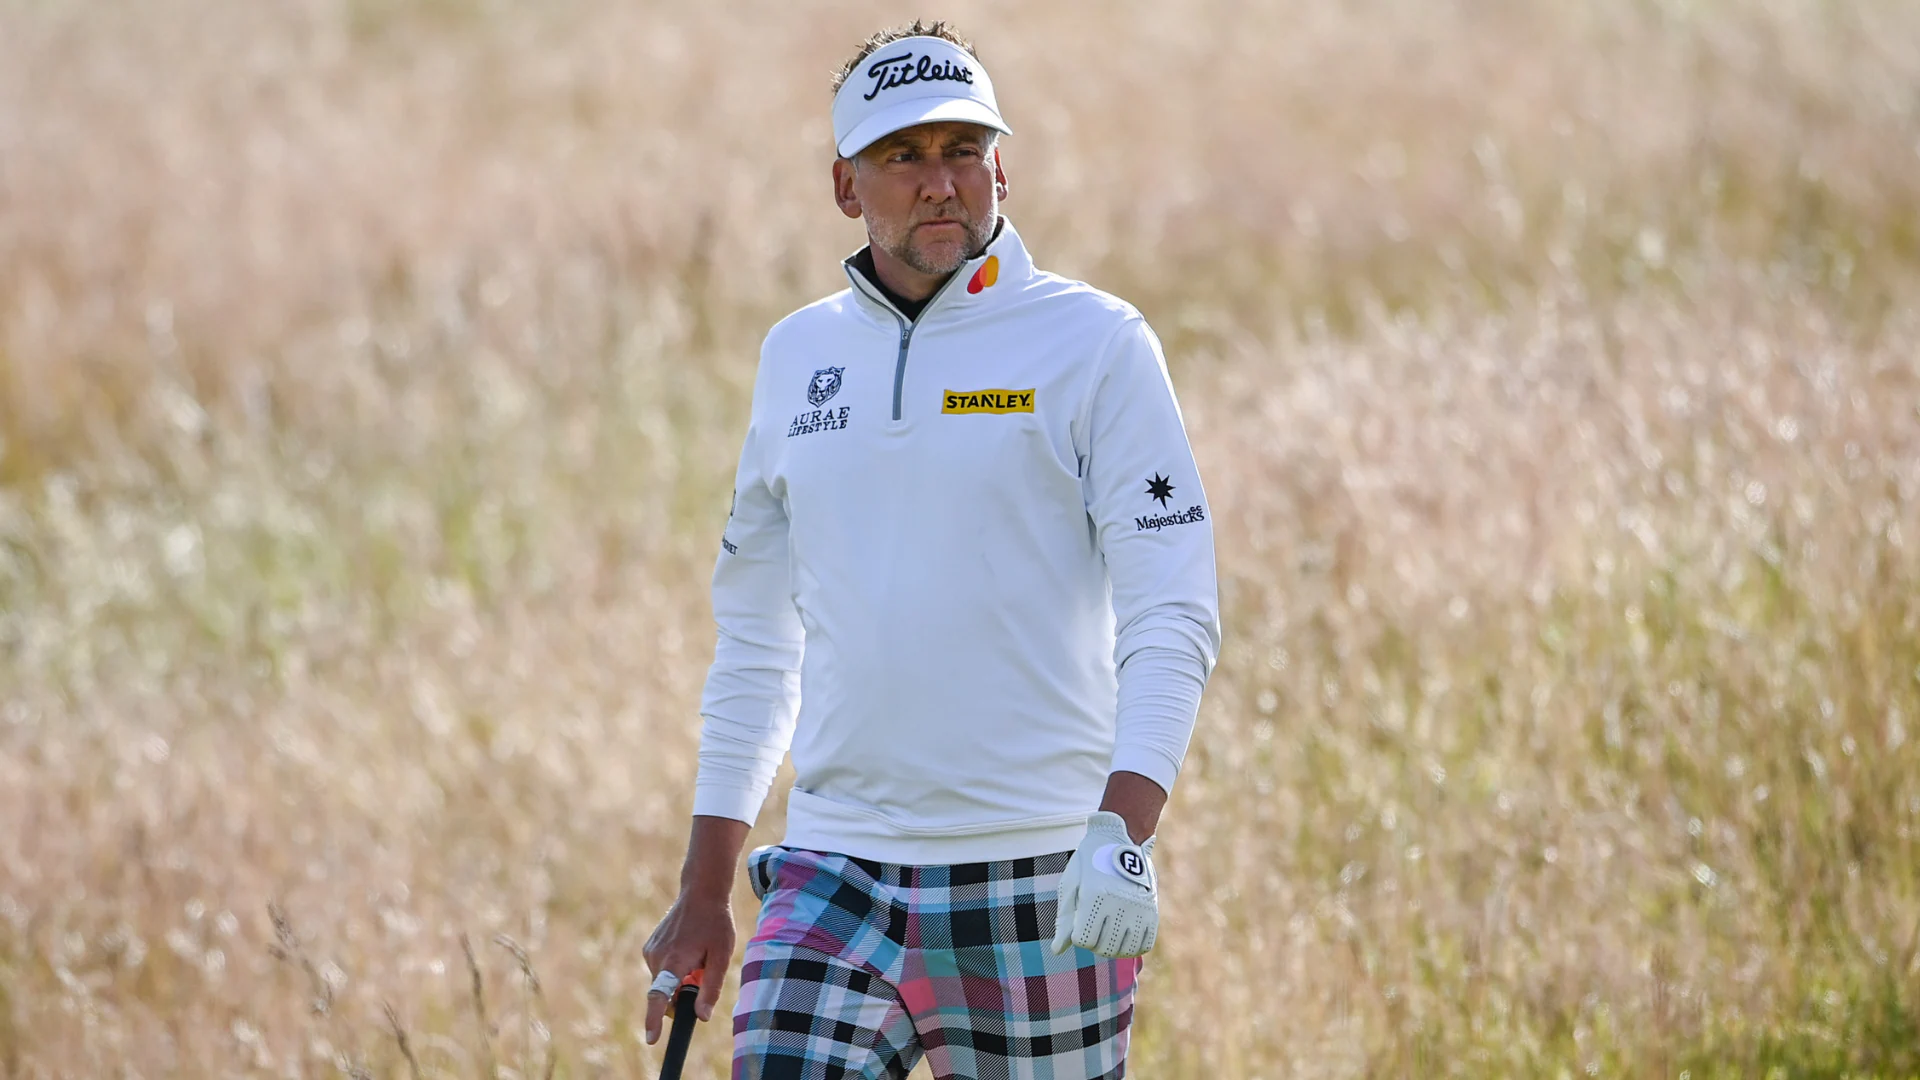 Report: Mastercard pauses endorsement deal with Ian Poulter, Graeme McDowell